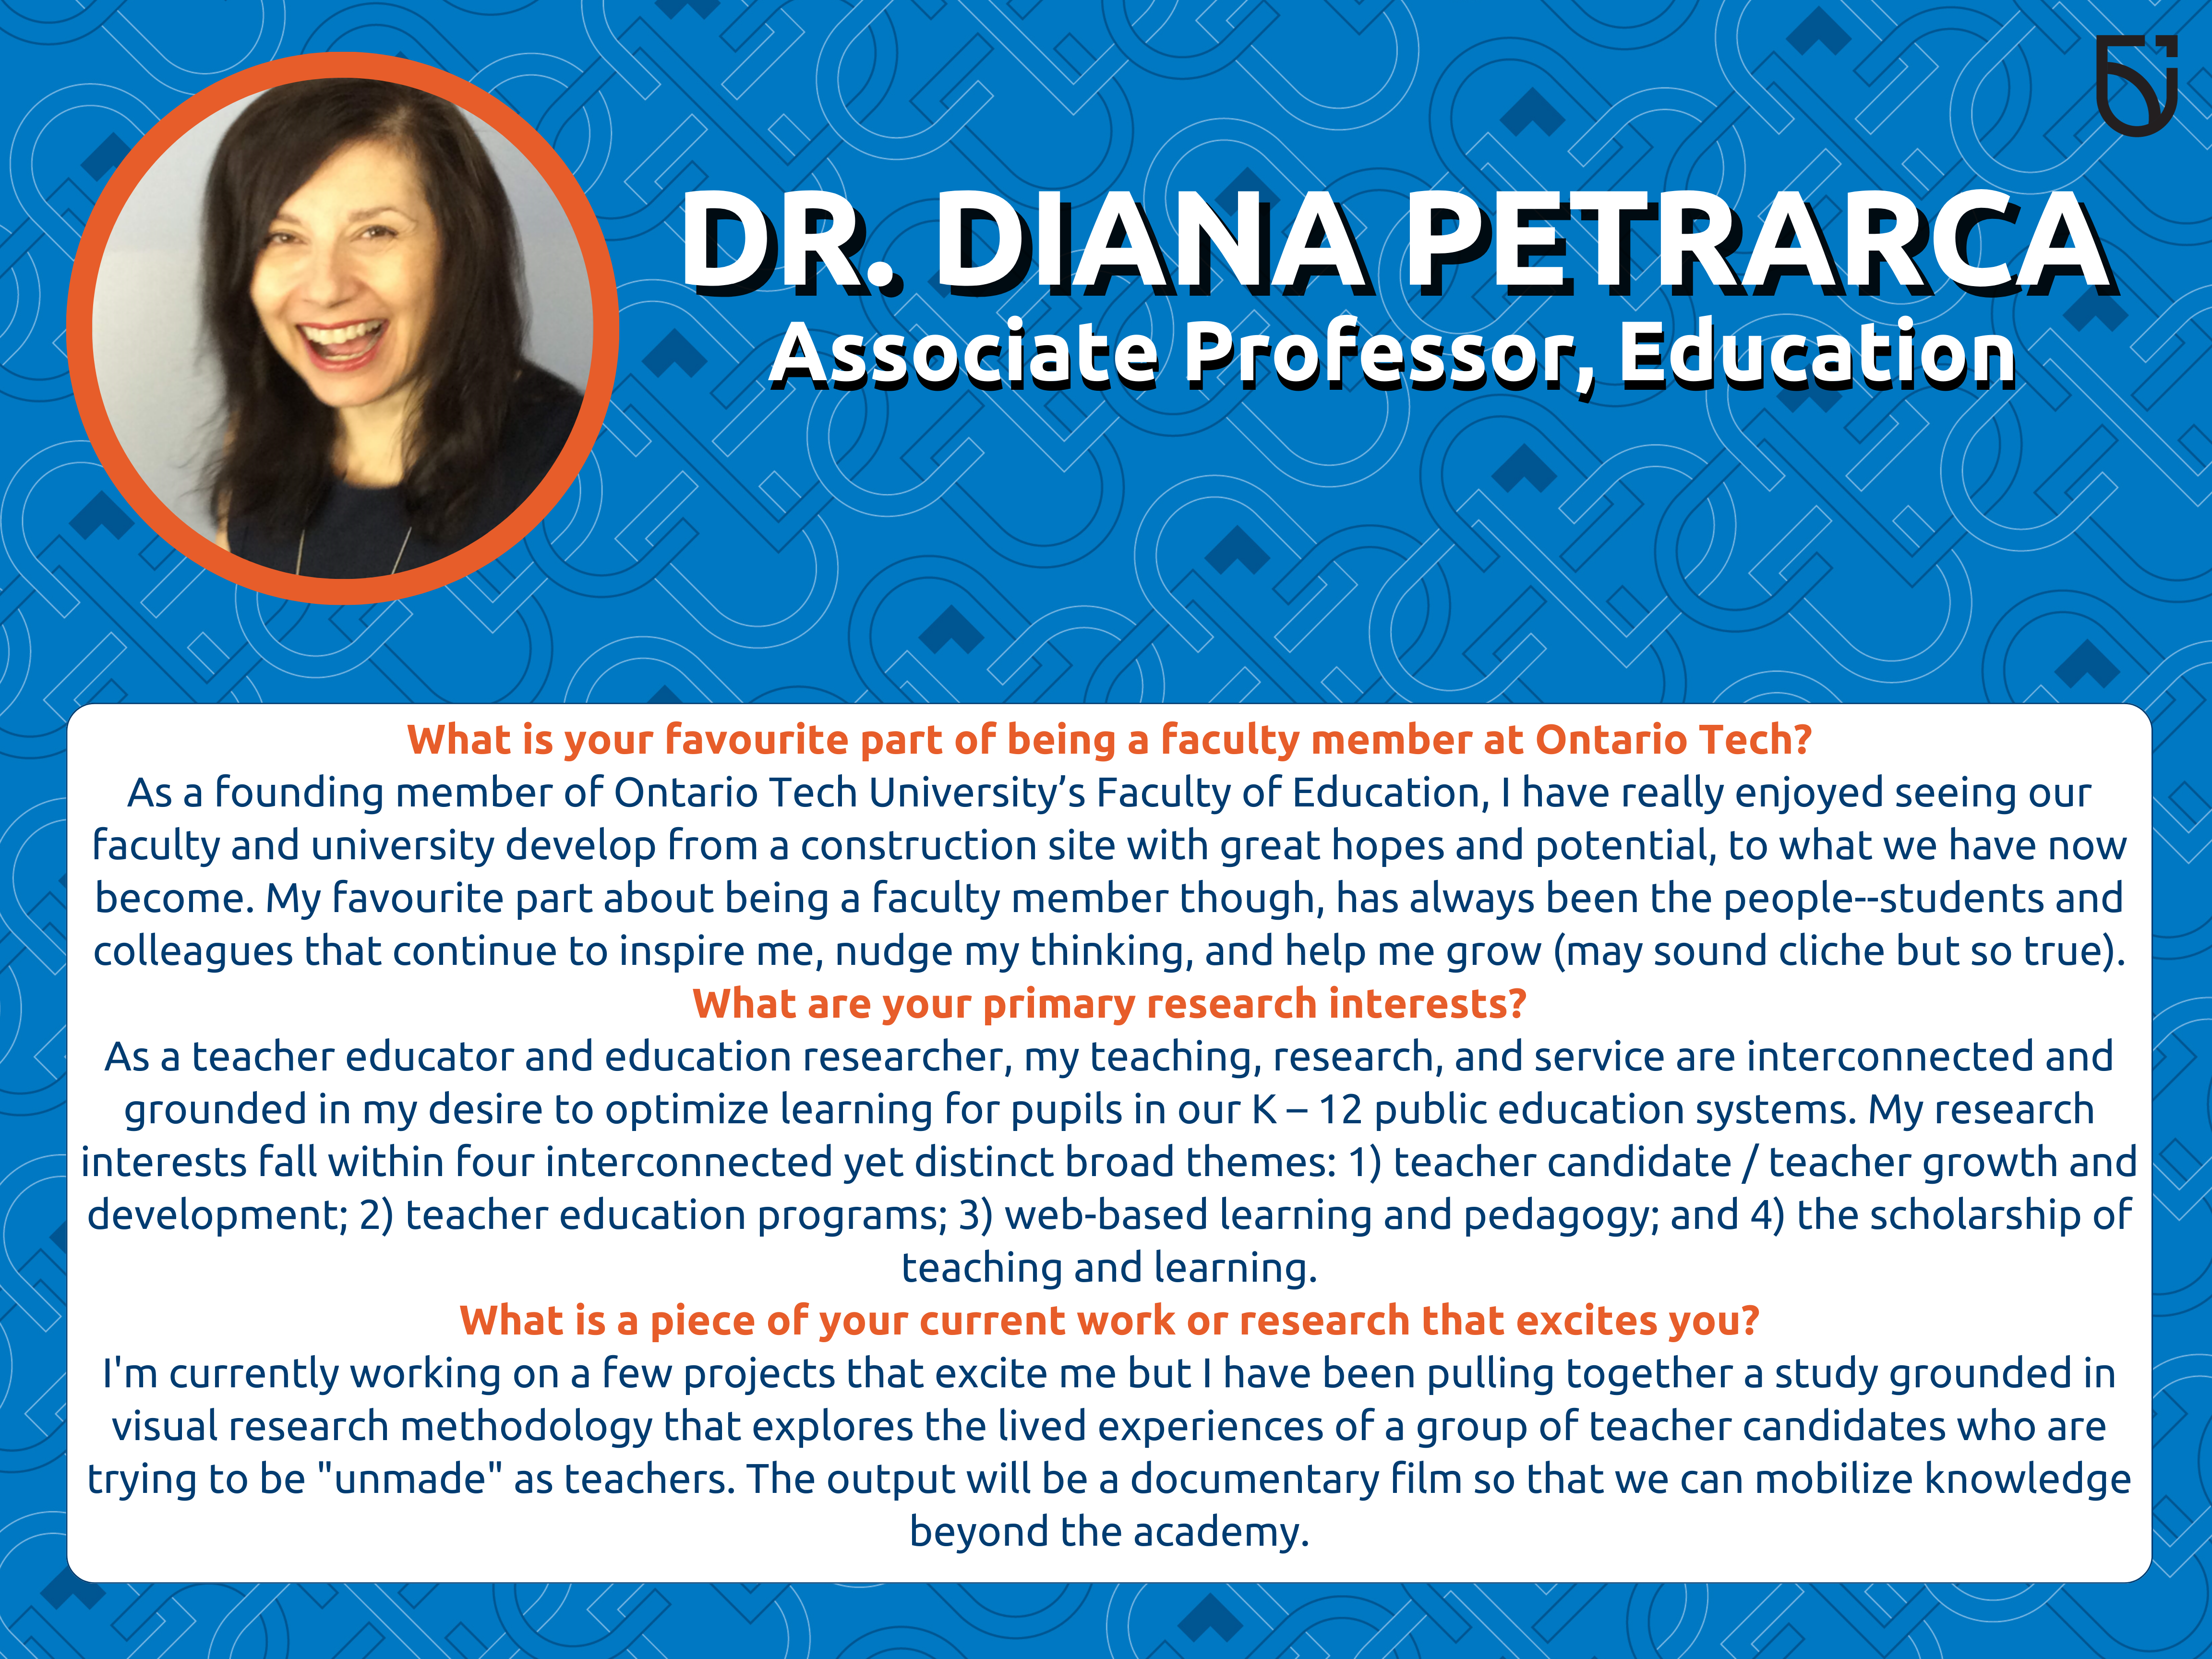 This photo is a Women’s Wednesday feature of Dr. Diana Petrarca, an Associate Professor in the Mitch and Leslie Frazer Faculty of Education